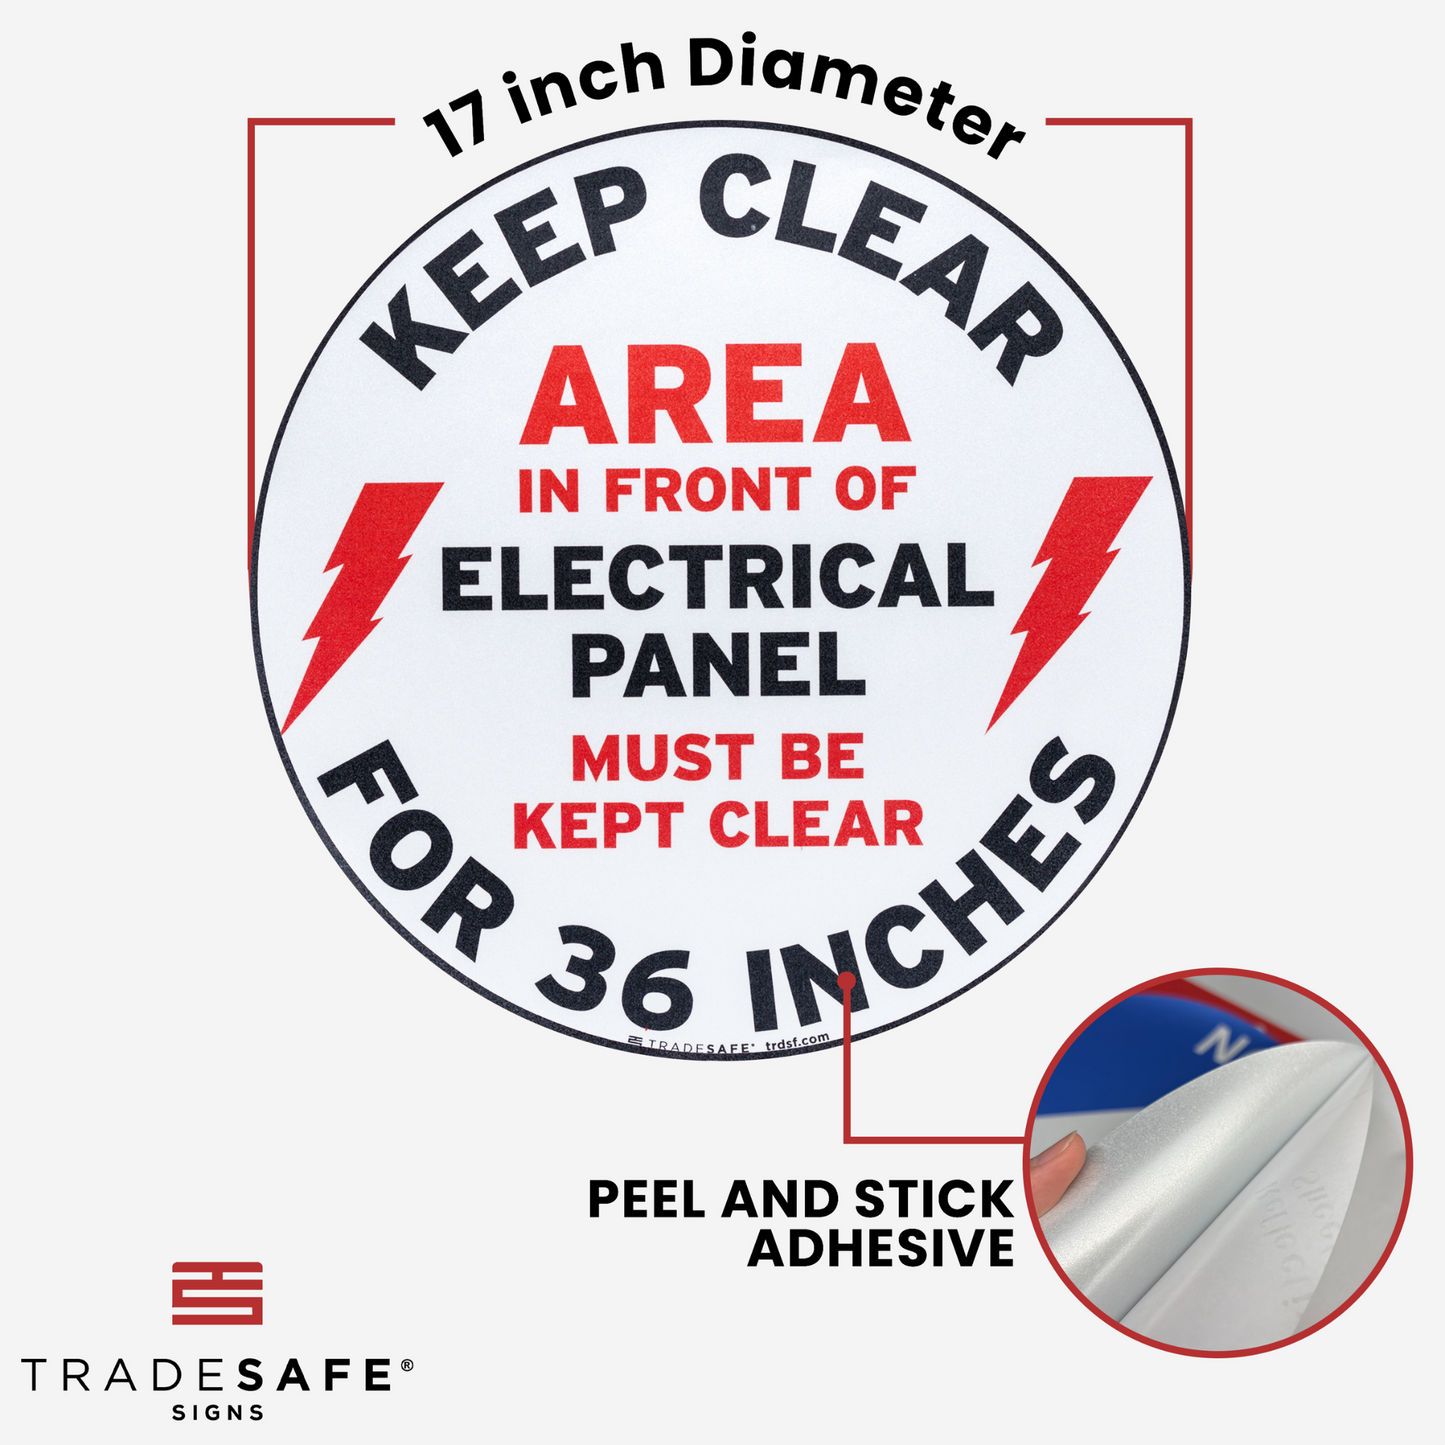 dimensions of keep clear electrical panel sign